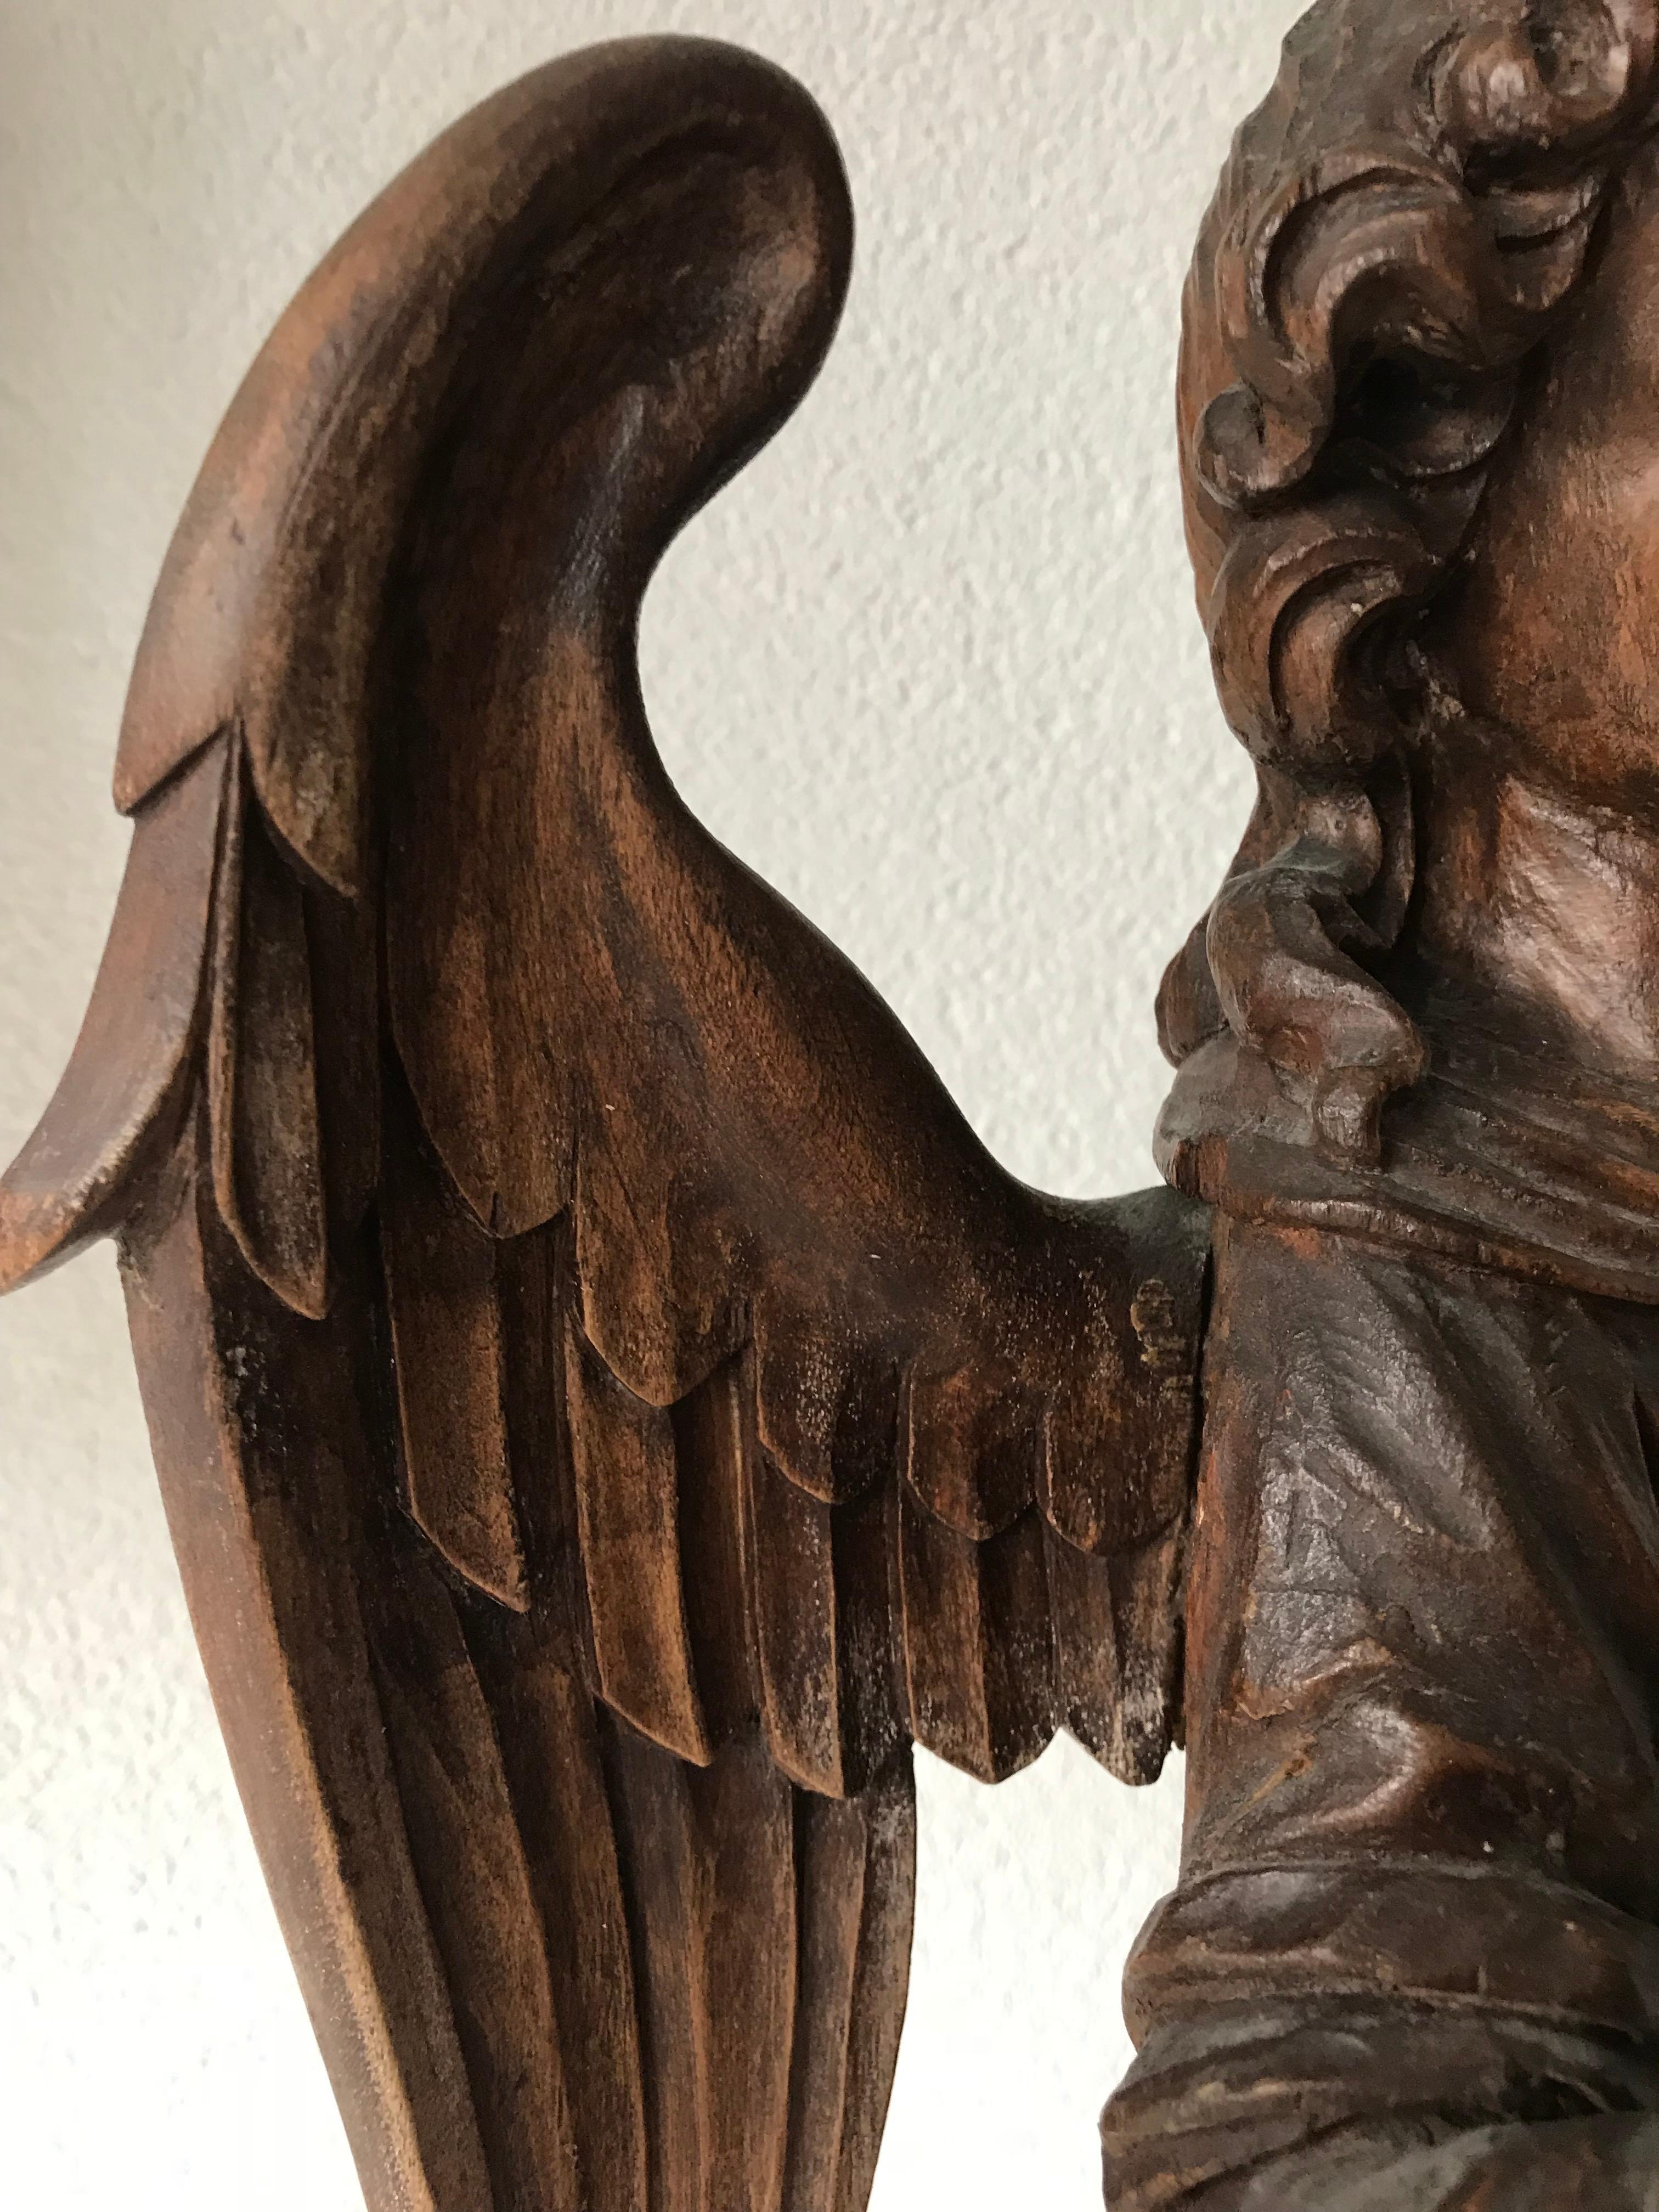 19th Century Hand-Carved Oak Angel Statue / Sculpture with Wings Possibly Saint Michael